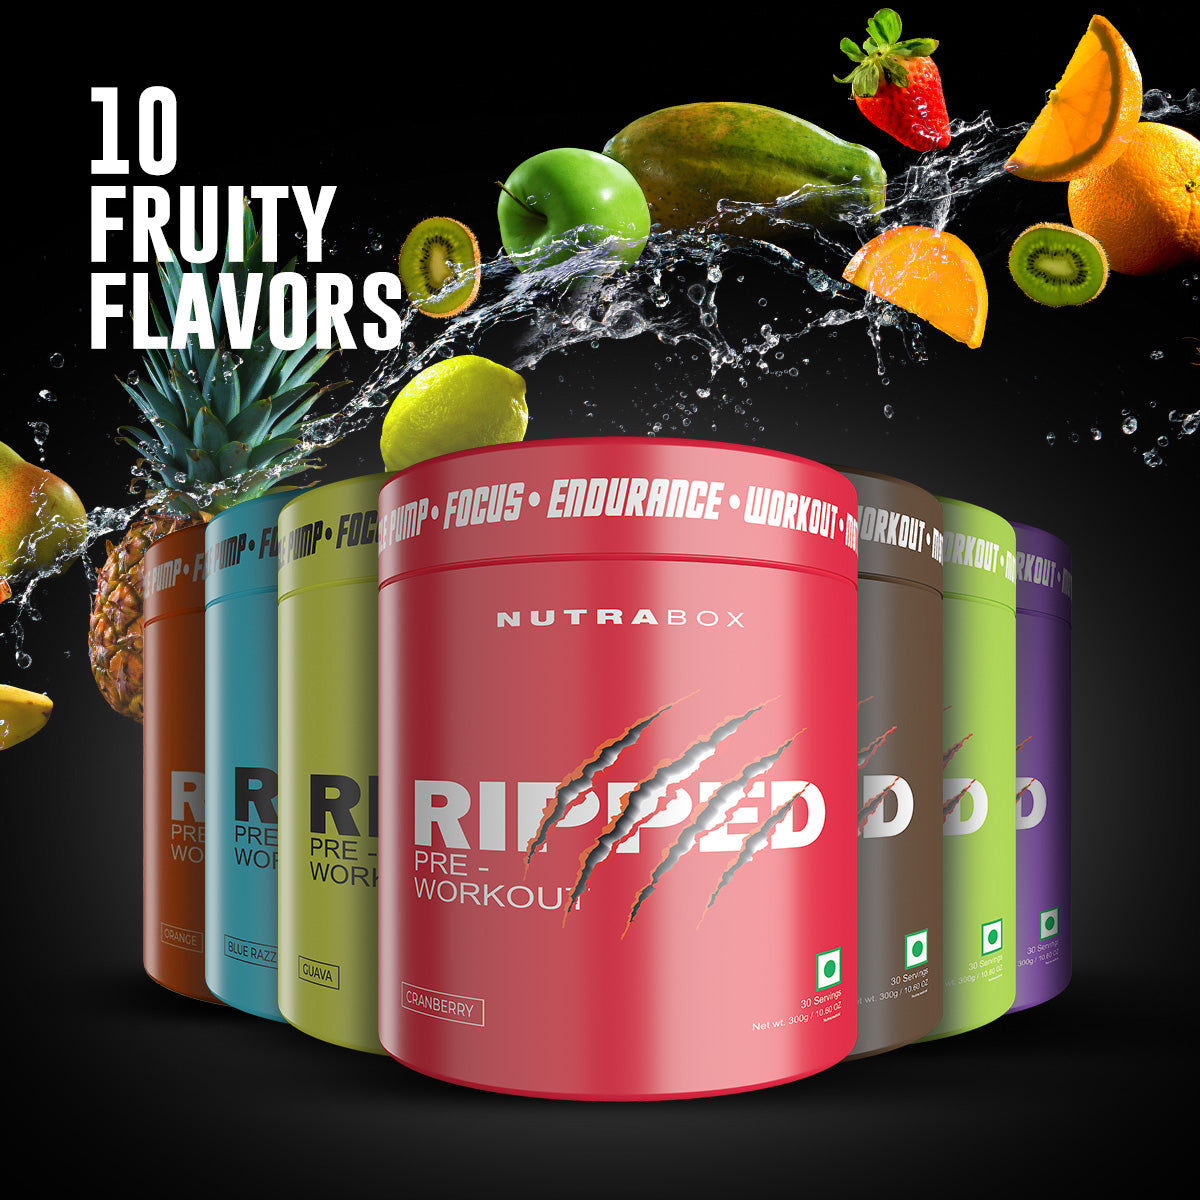 10 Fruity flavors of Ripped Preworkout